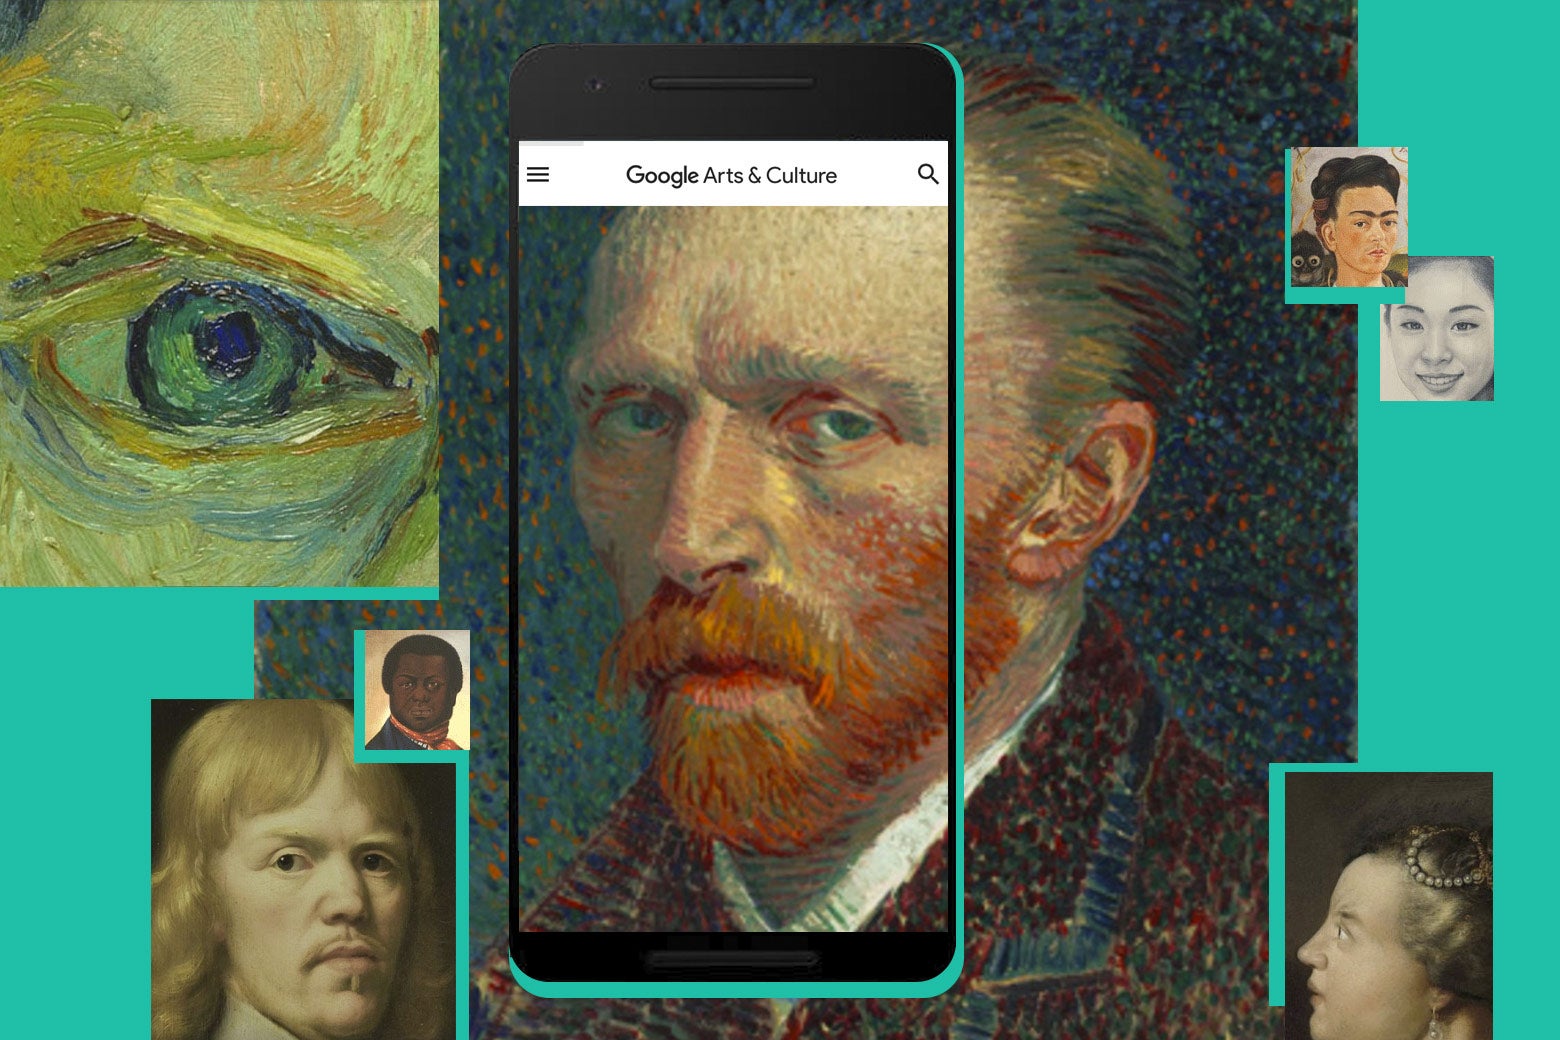 A van Gogh self-portrait and other images float around an iPhone.